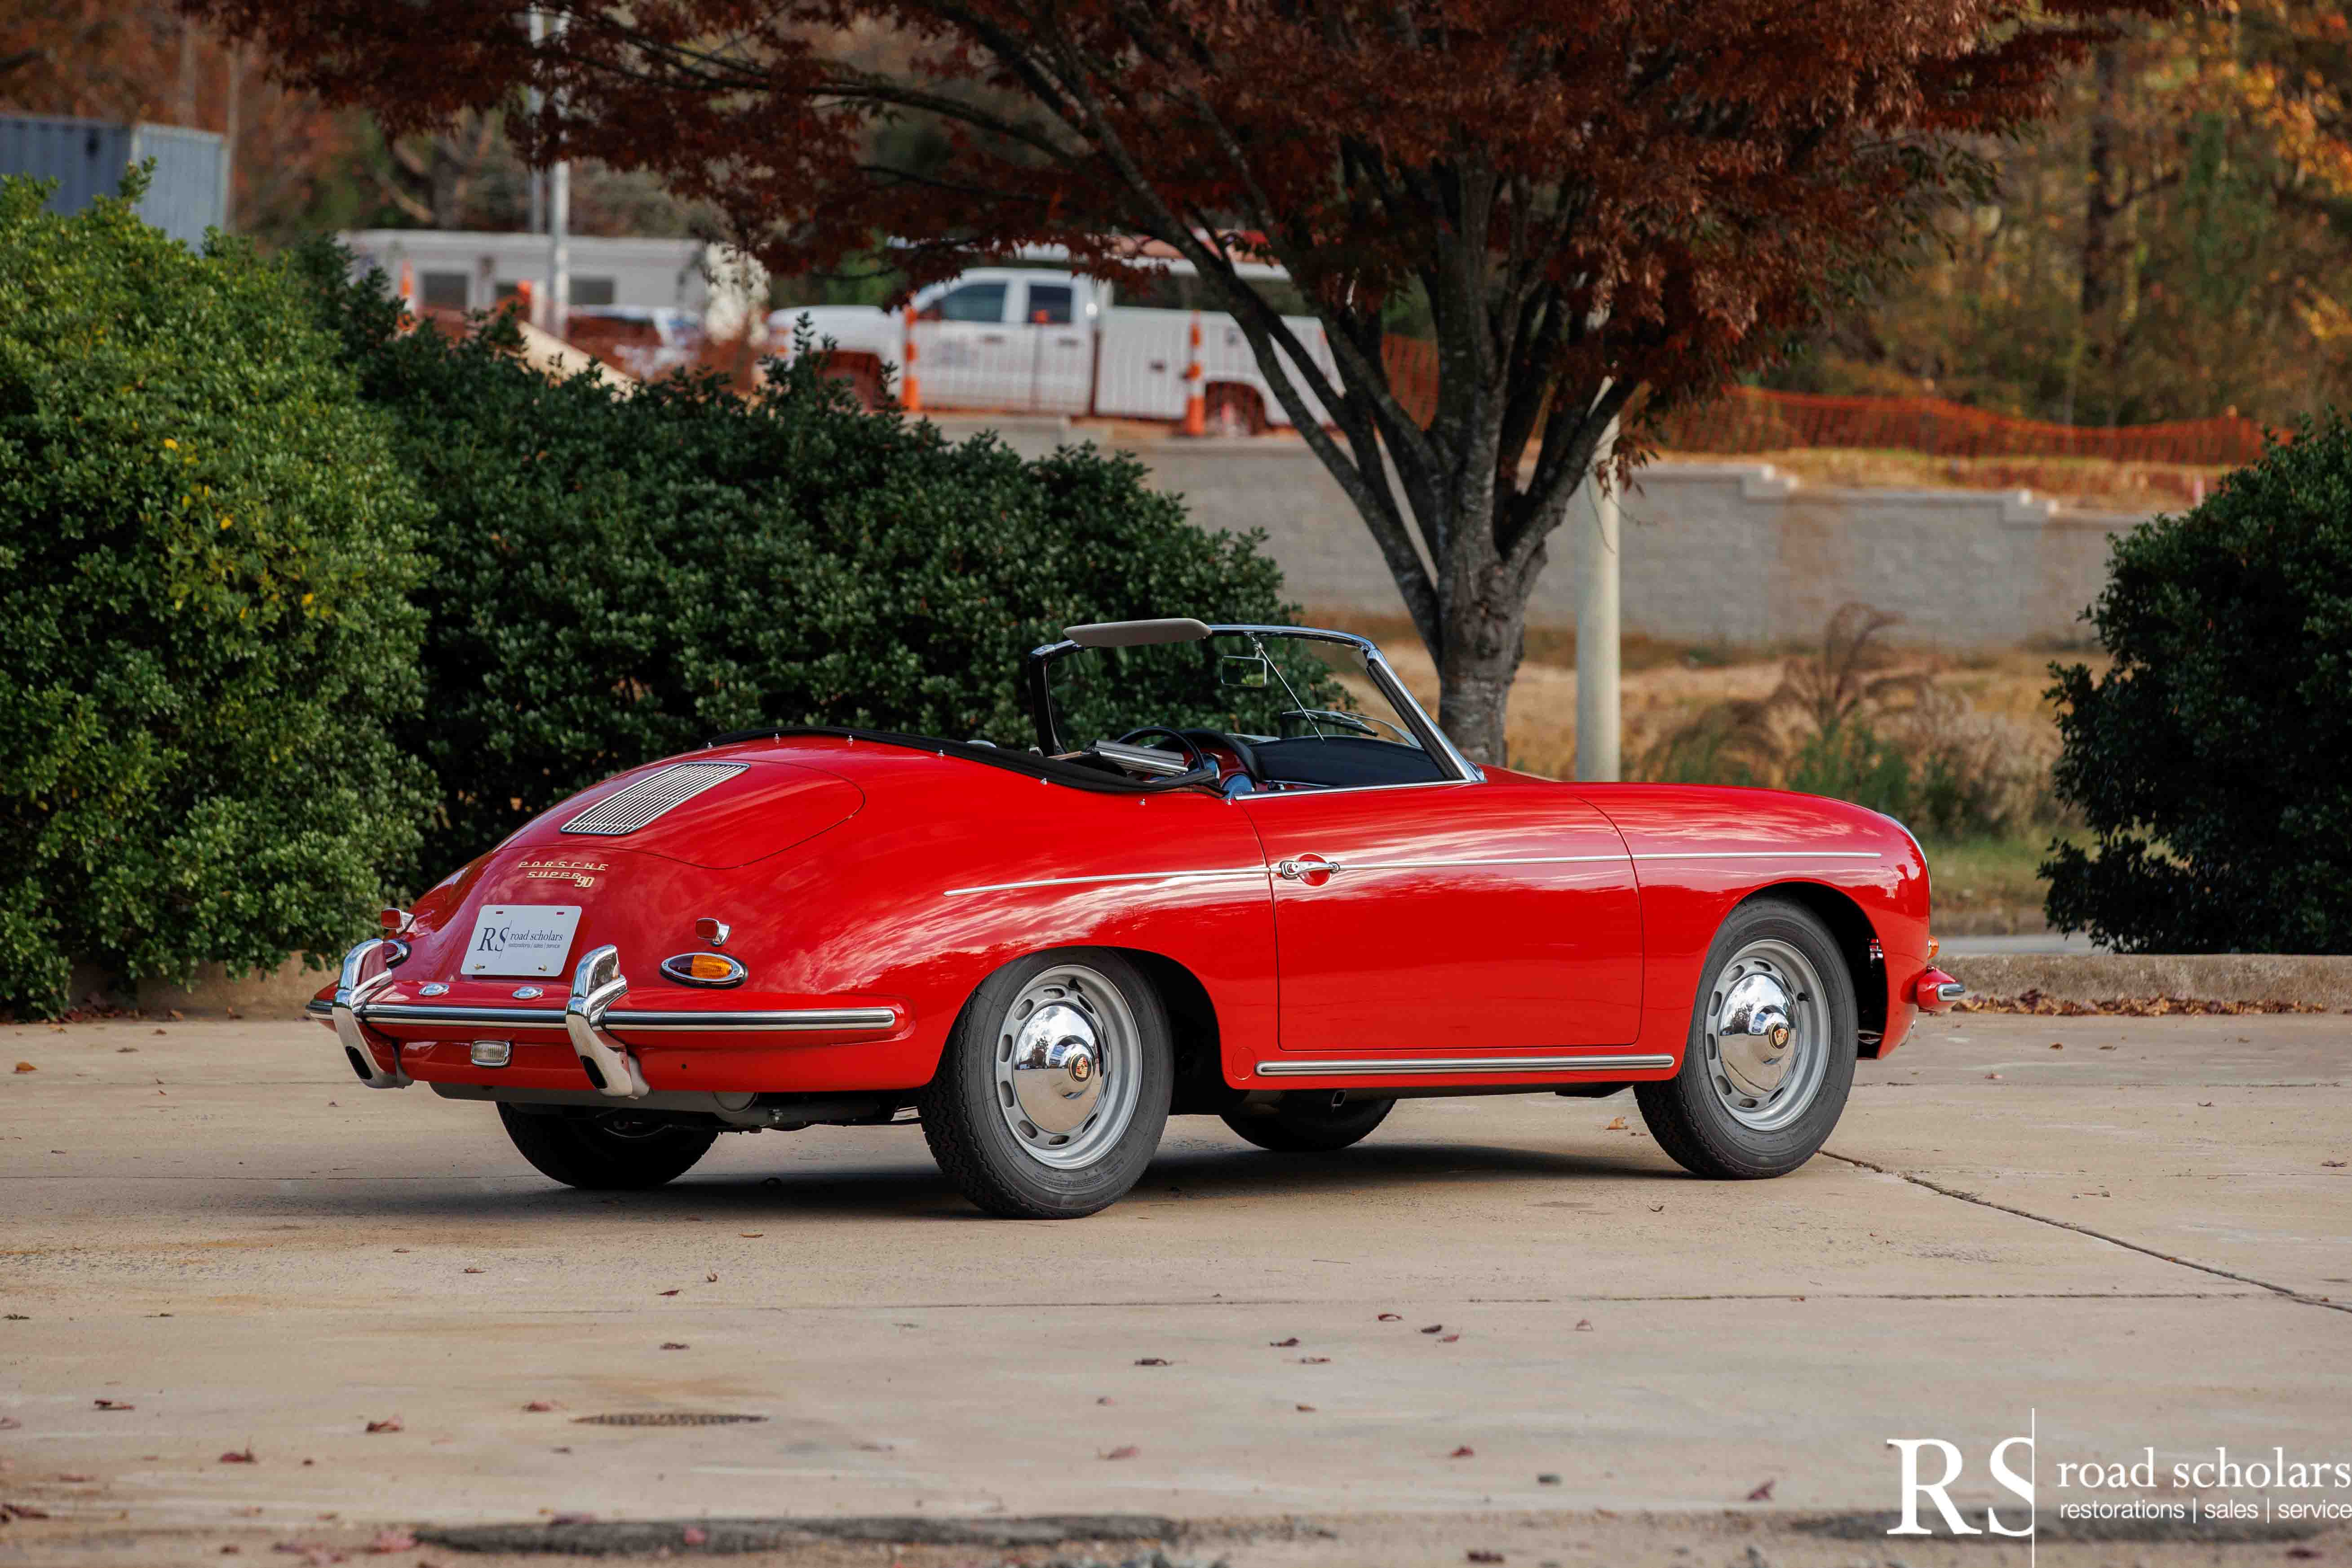 1961 Porsche 356B Super 90 (T5) Roadster chassis 89305 (watermarked)-39